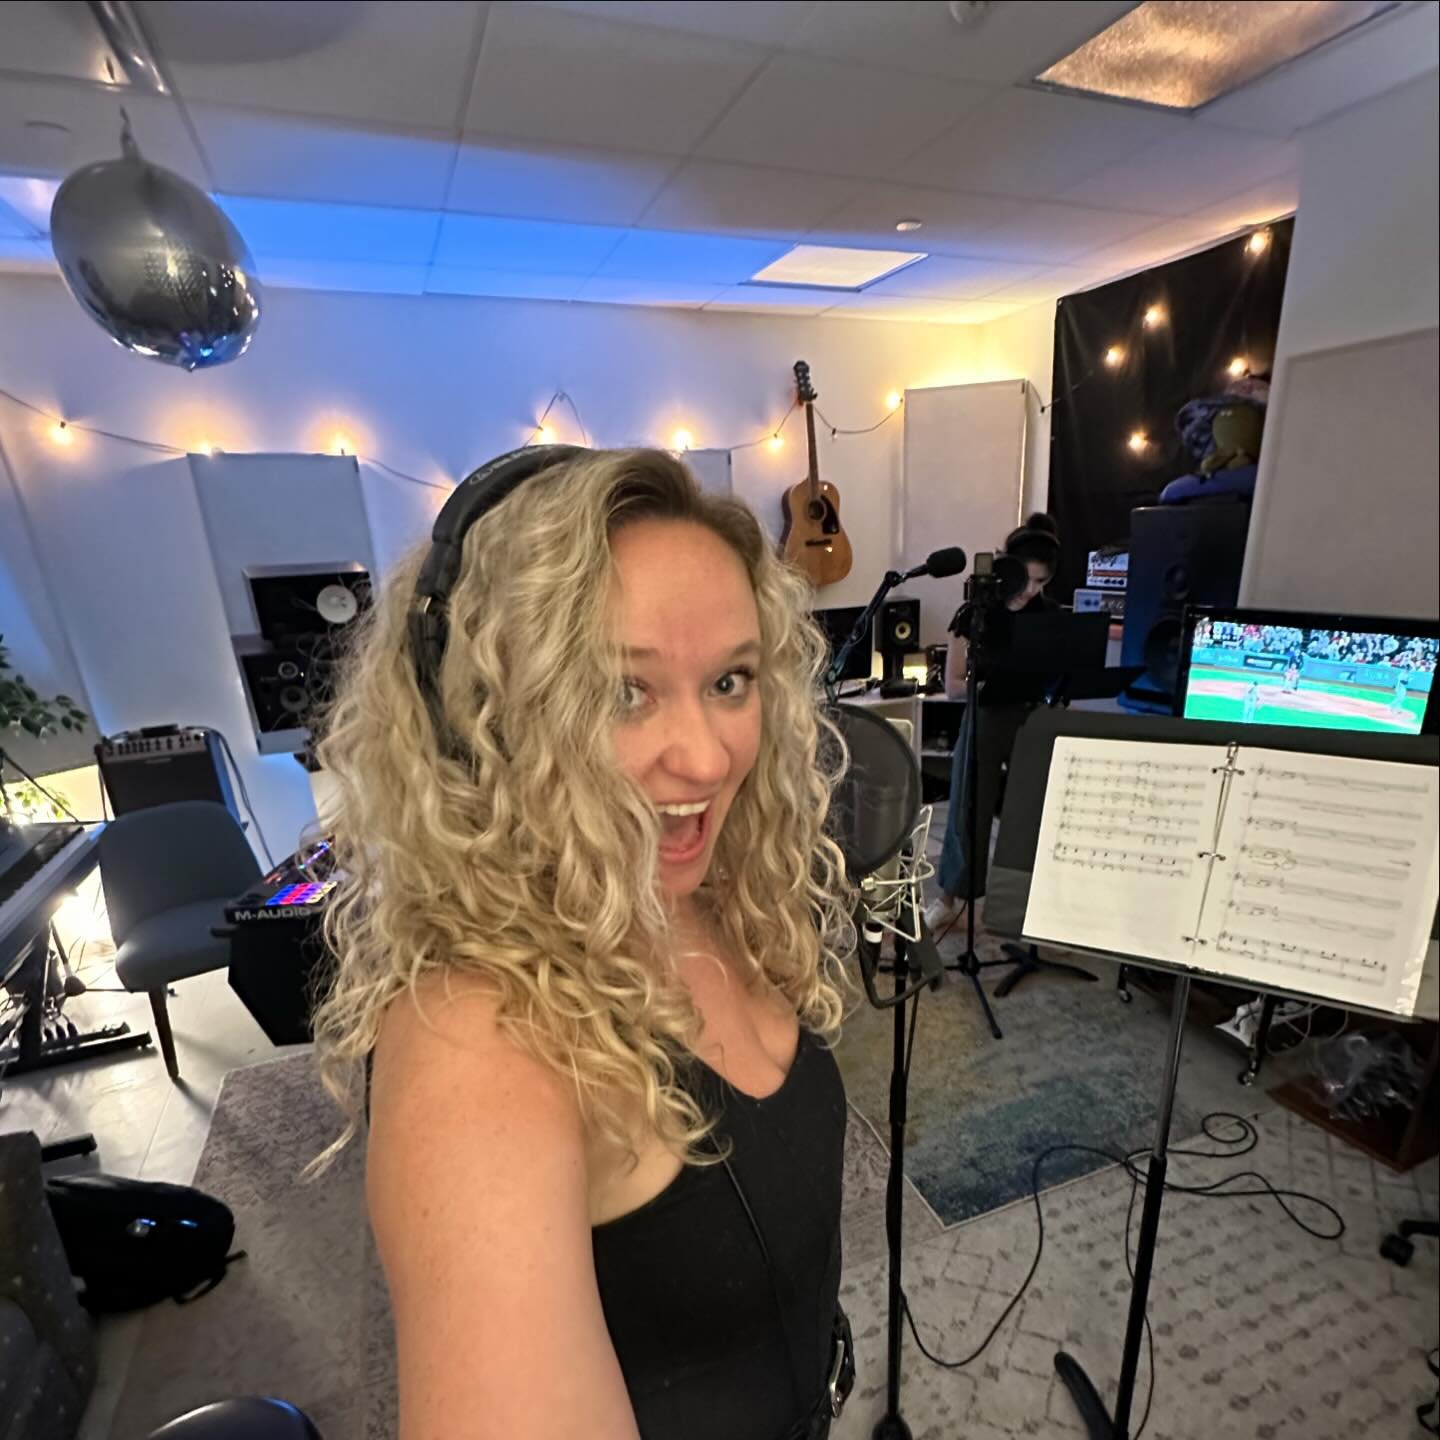 recorded a new musical at @atlanticrecords OK BYEEEEE

endlessly thankful to fellow curly gal @daratheredhead for the opportunity and for the sheer BRILLIANCE that is @halcionne 🎻

more to come xx